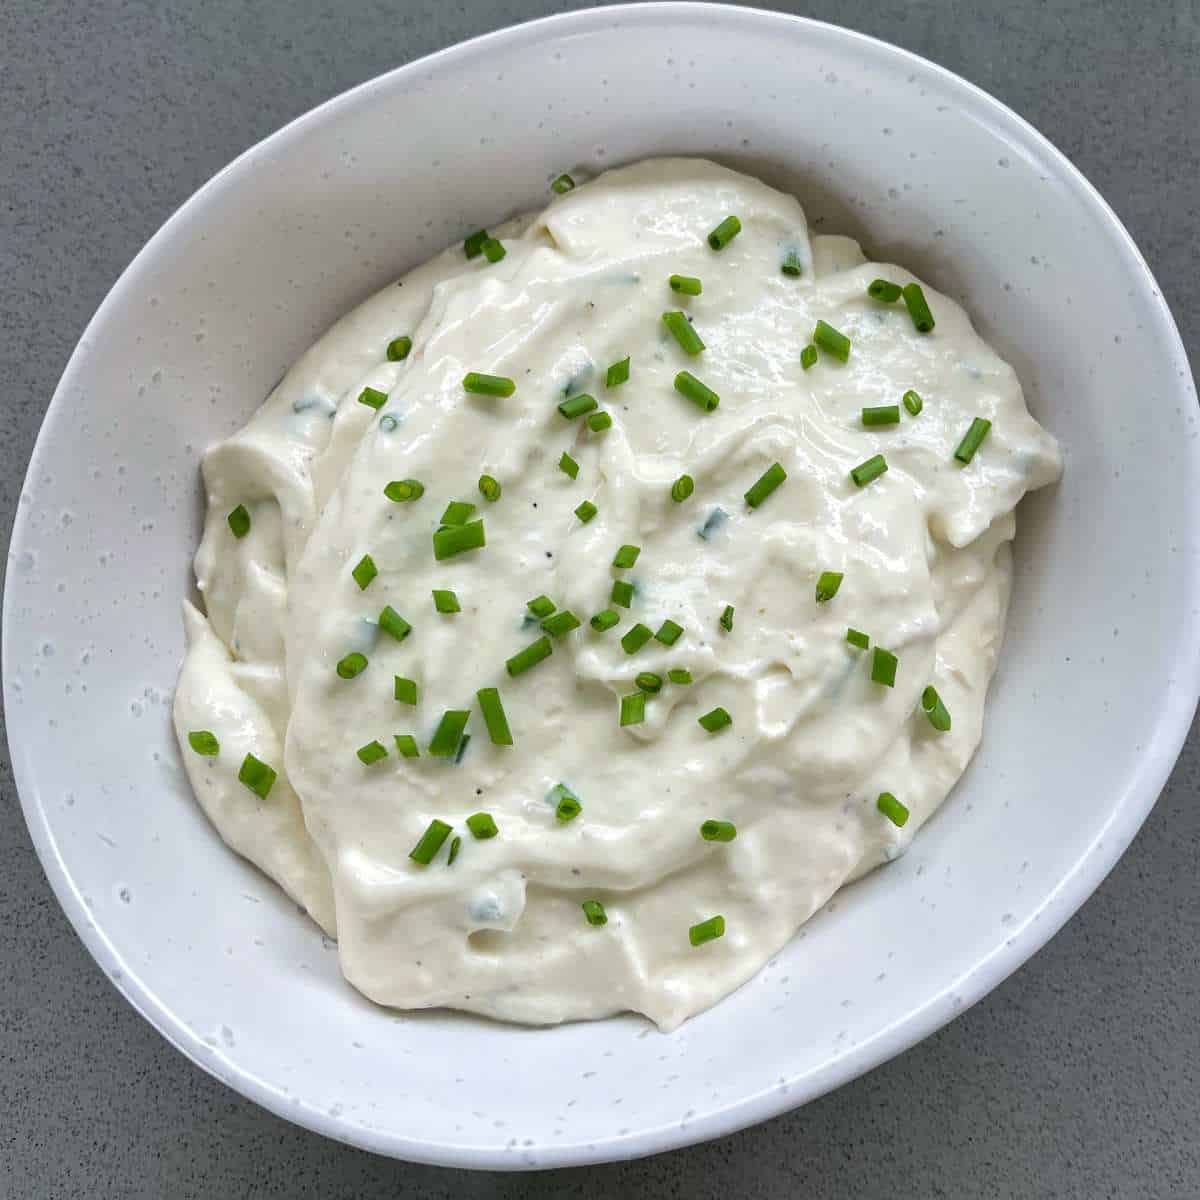 Creamed horseradish in a small white dish with chives on the top to garnish